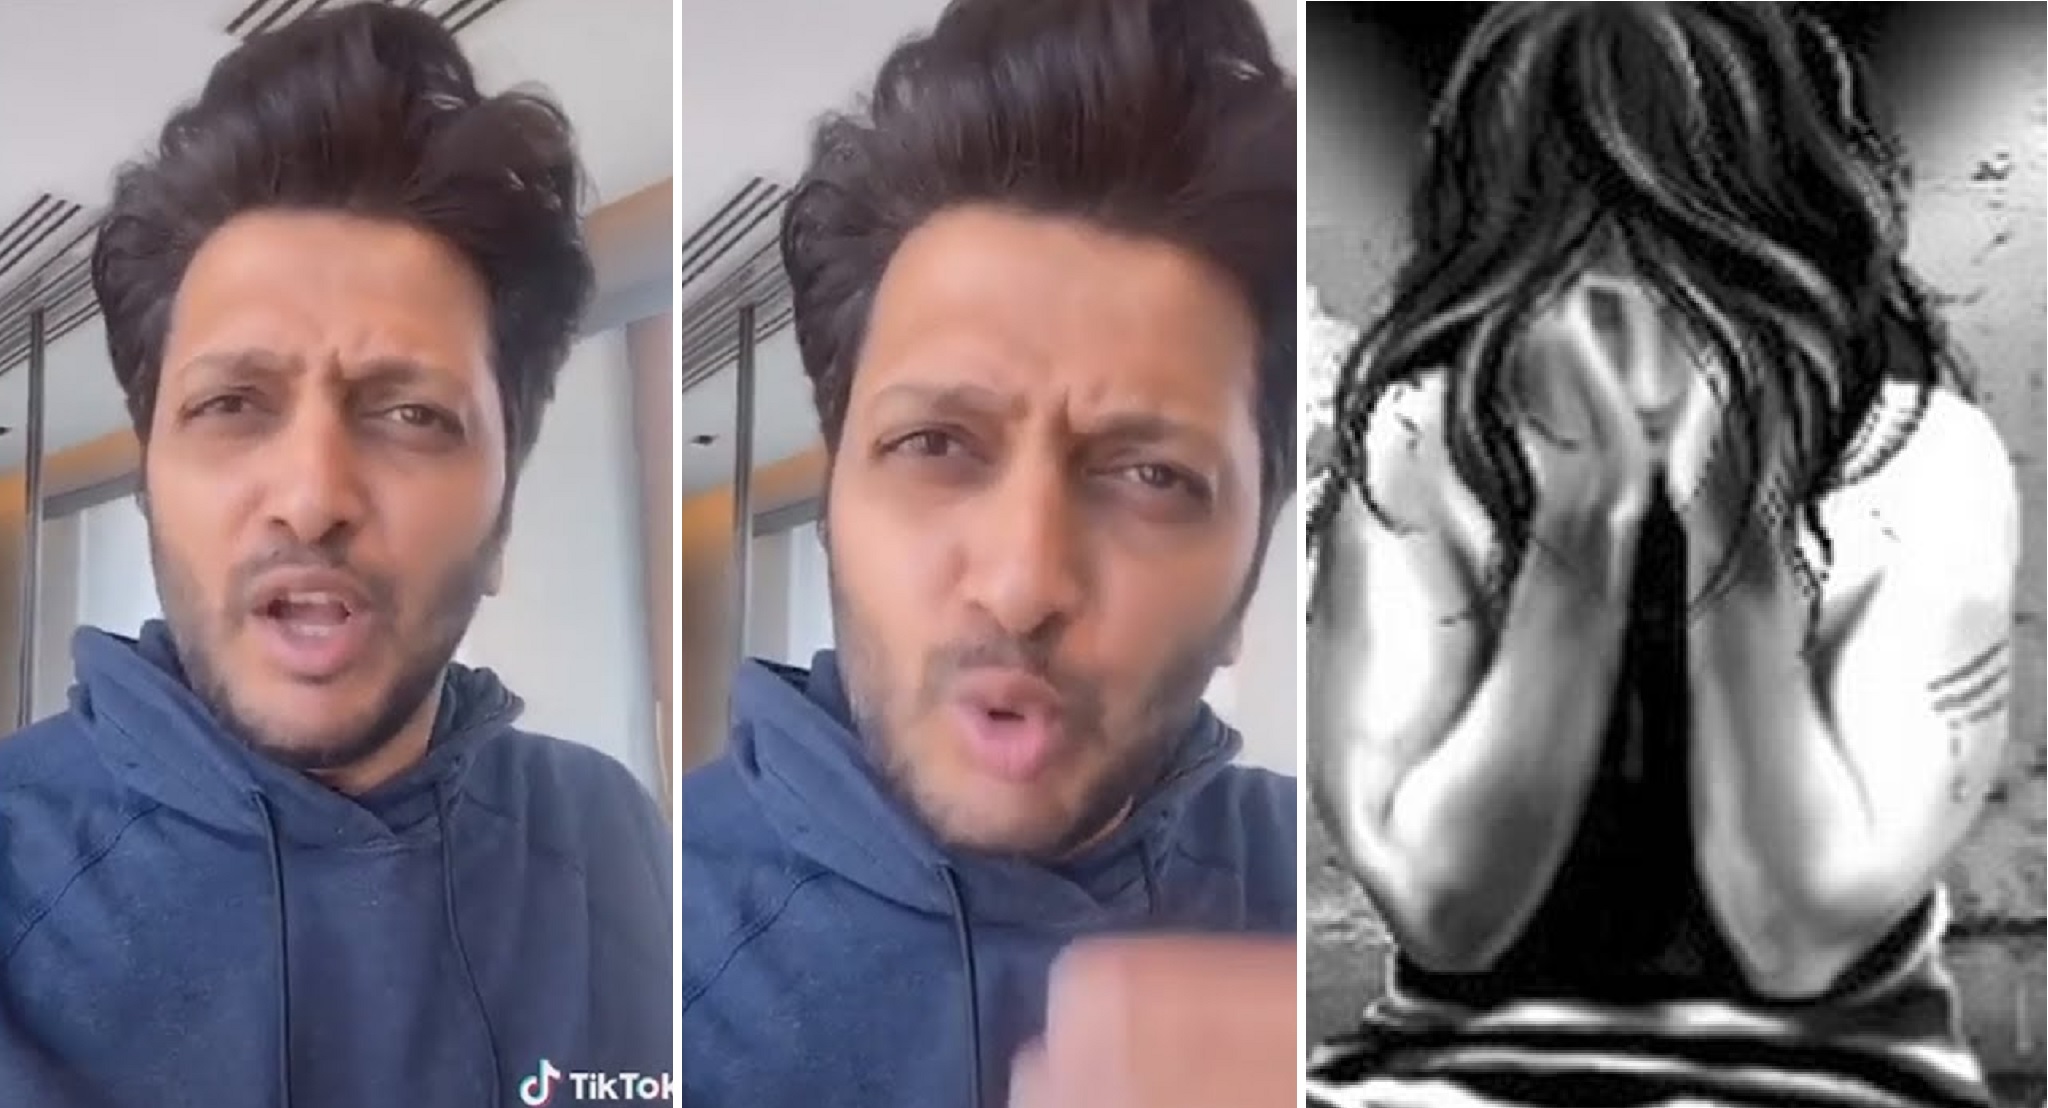 Riteish Deshmukh Expresses Anger After 13-Year-Old Girl’s Rape By SHO, ‘Such People Should Be Hanged On Streets’